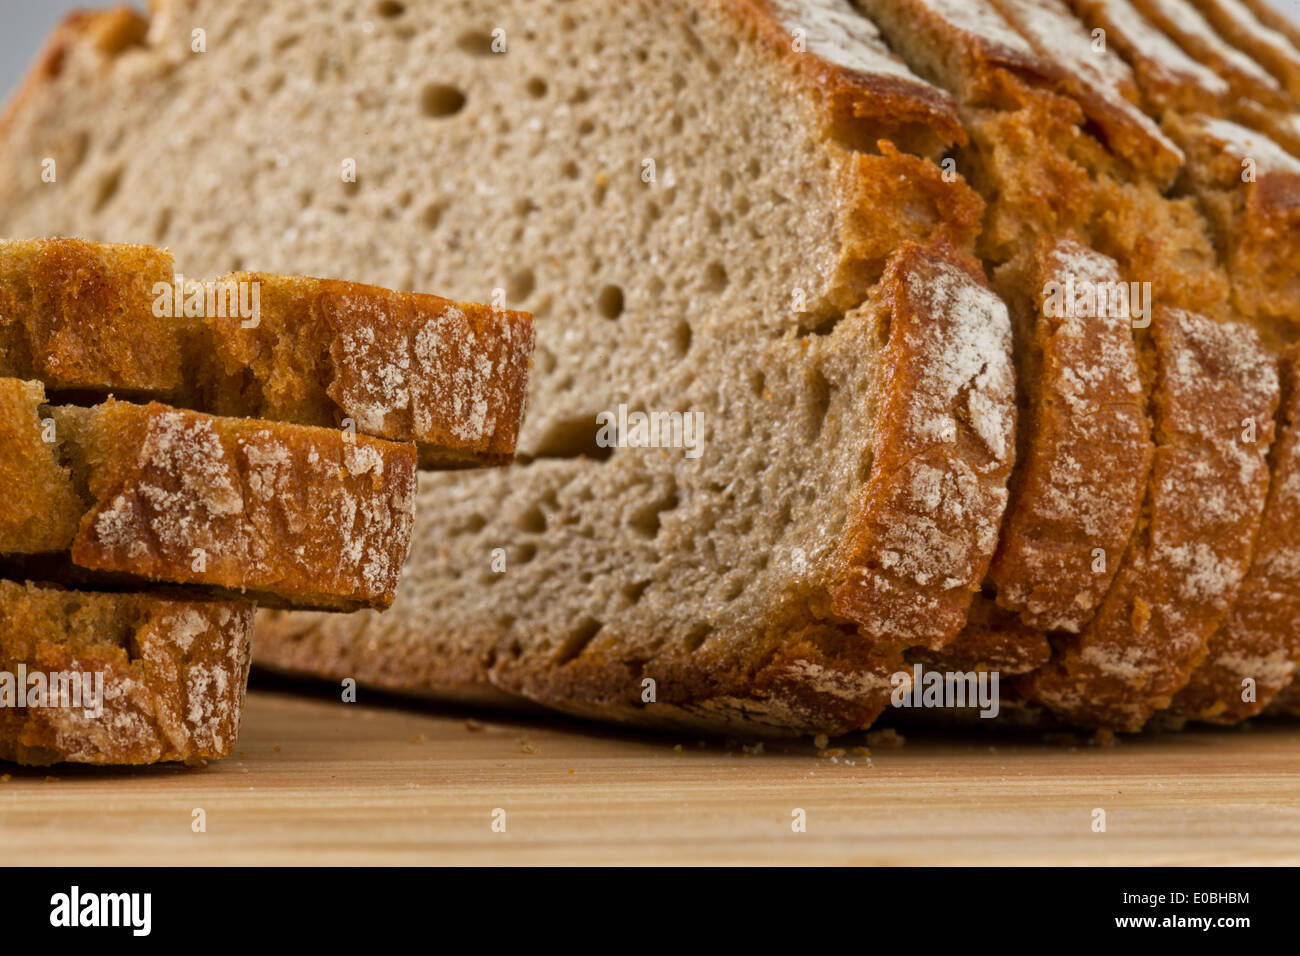 Several slices of dark bread lie side by side Stock Photo